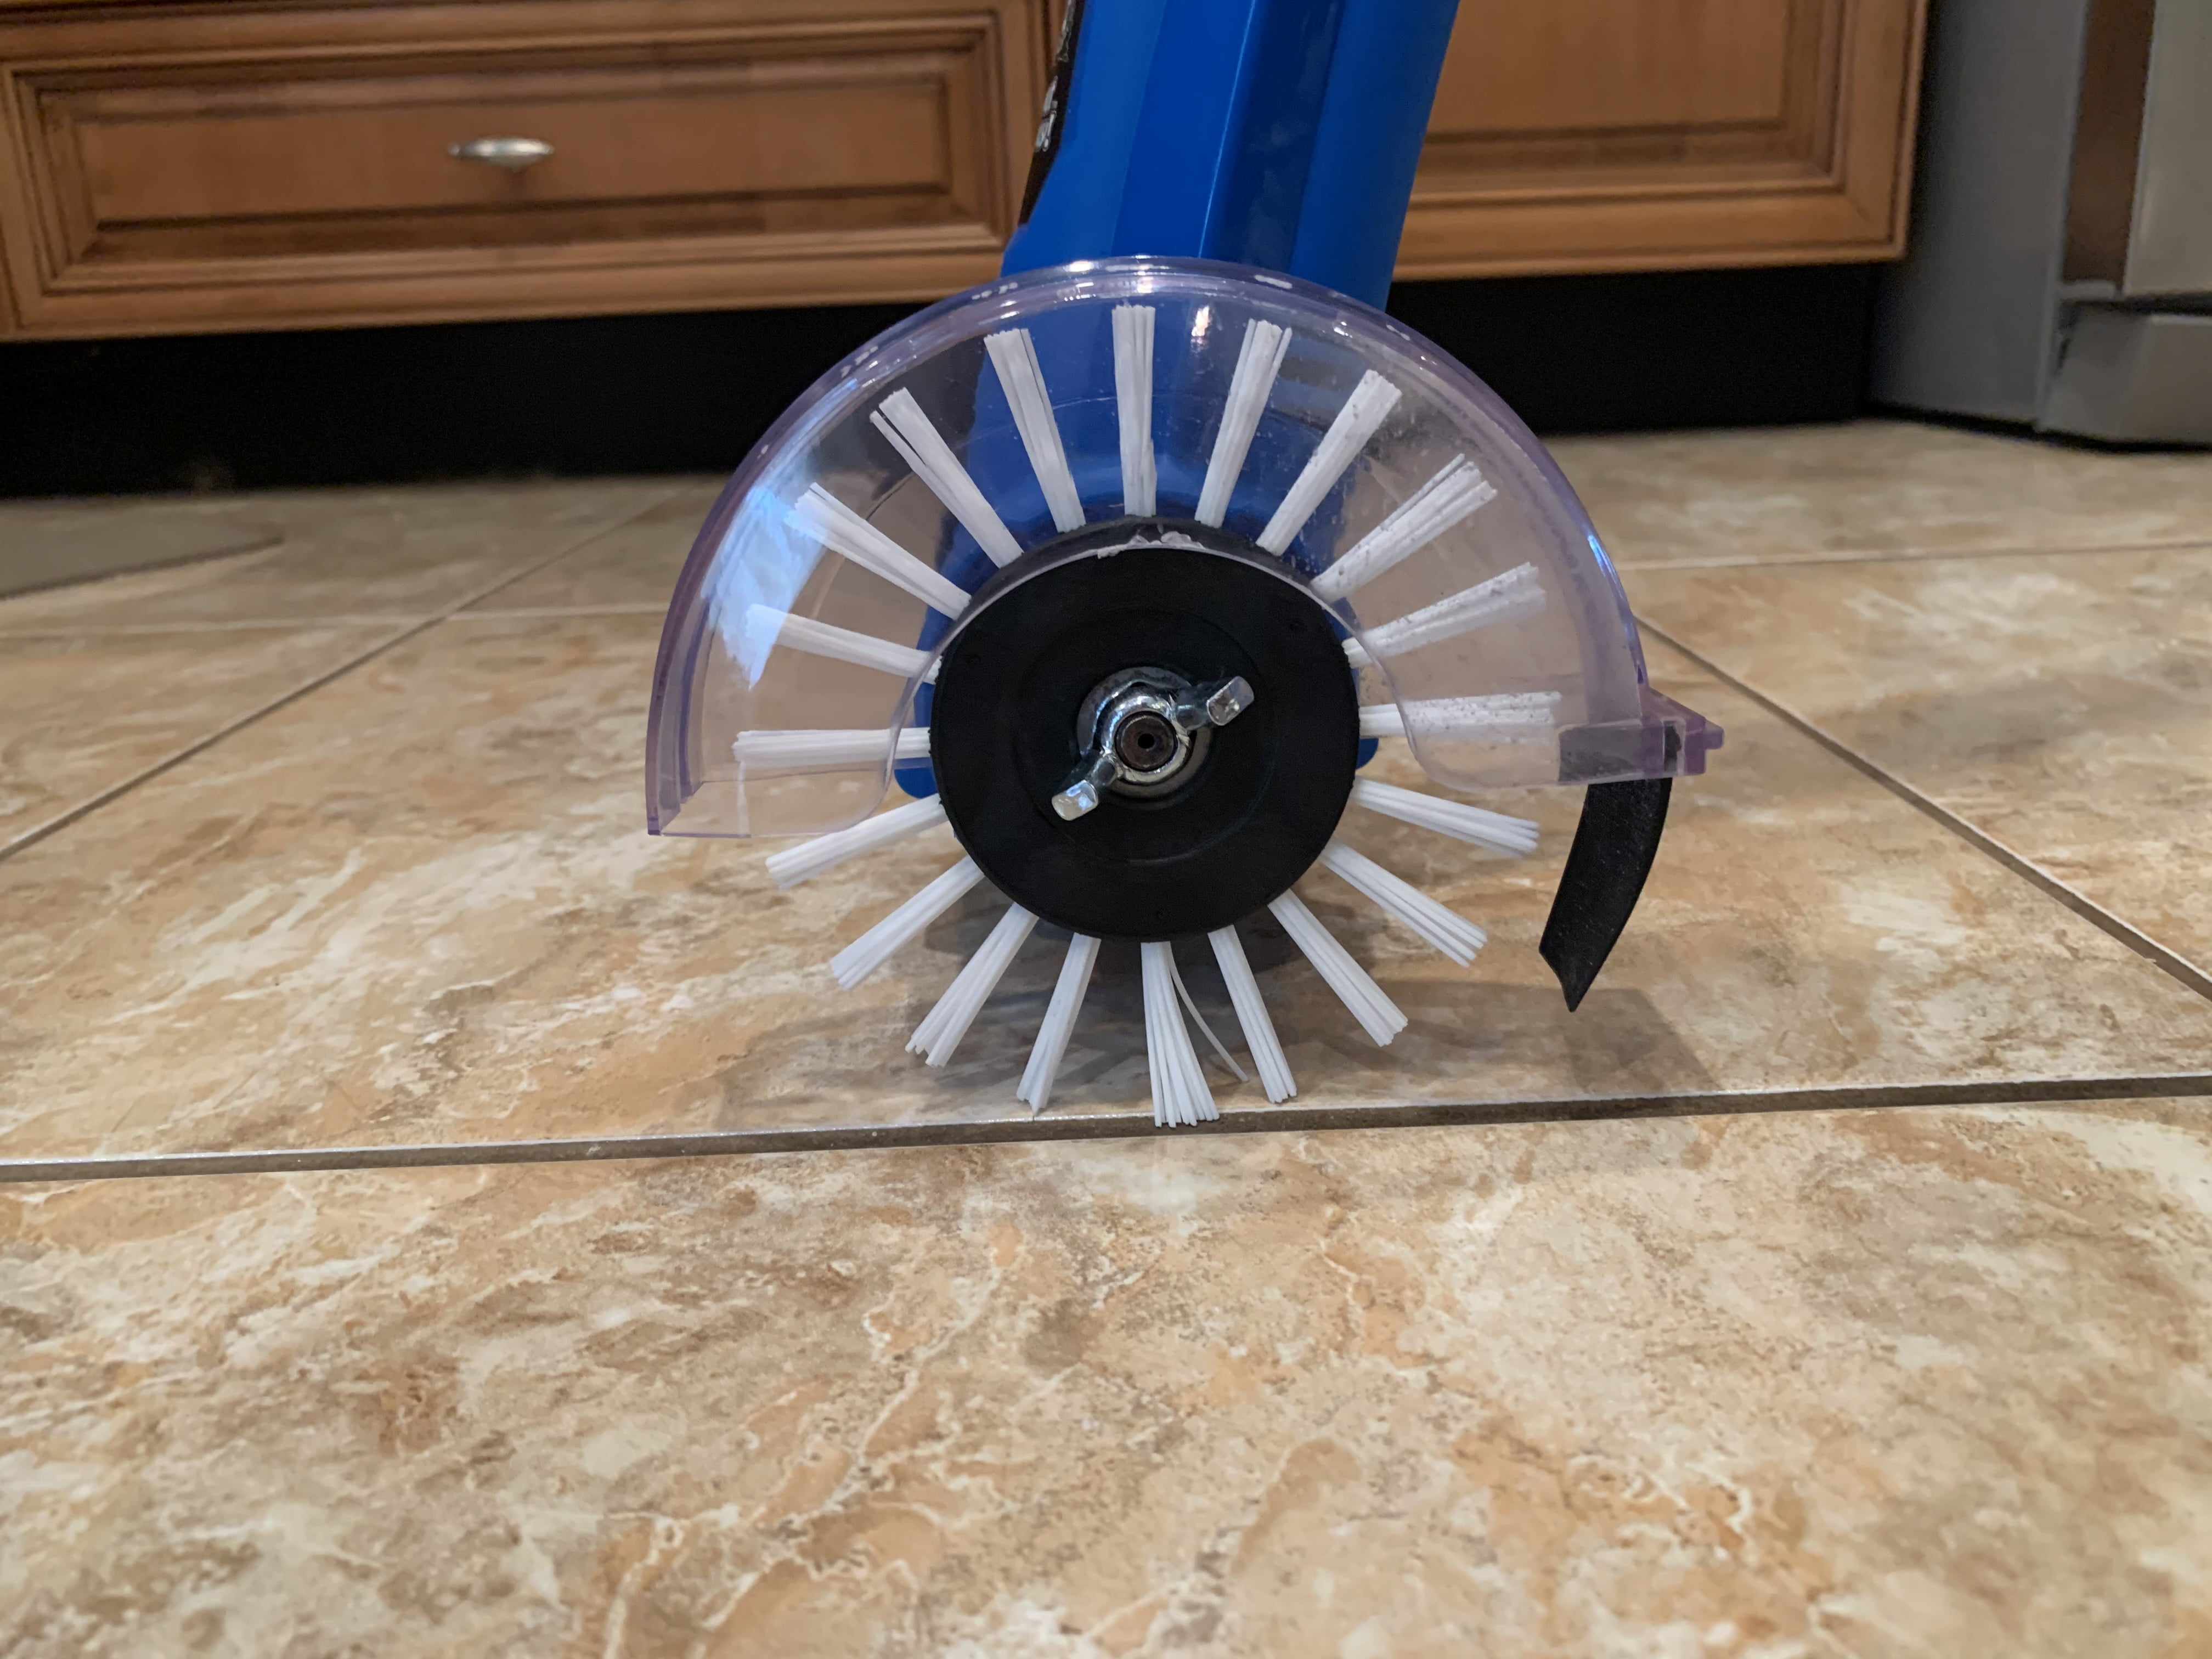 Grout Groovy Electric Stand Up Tile Grout Cleaner for Narrow Grout, Safely  Removes Dirt from Grout, 1 Narrow Brush, 20' Cord